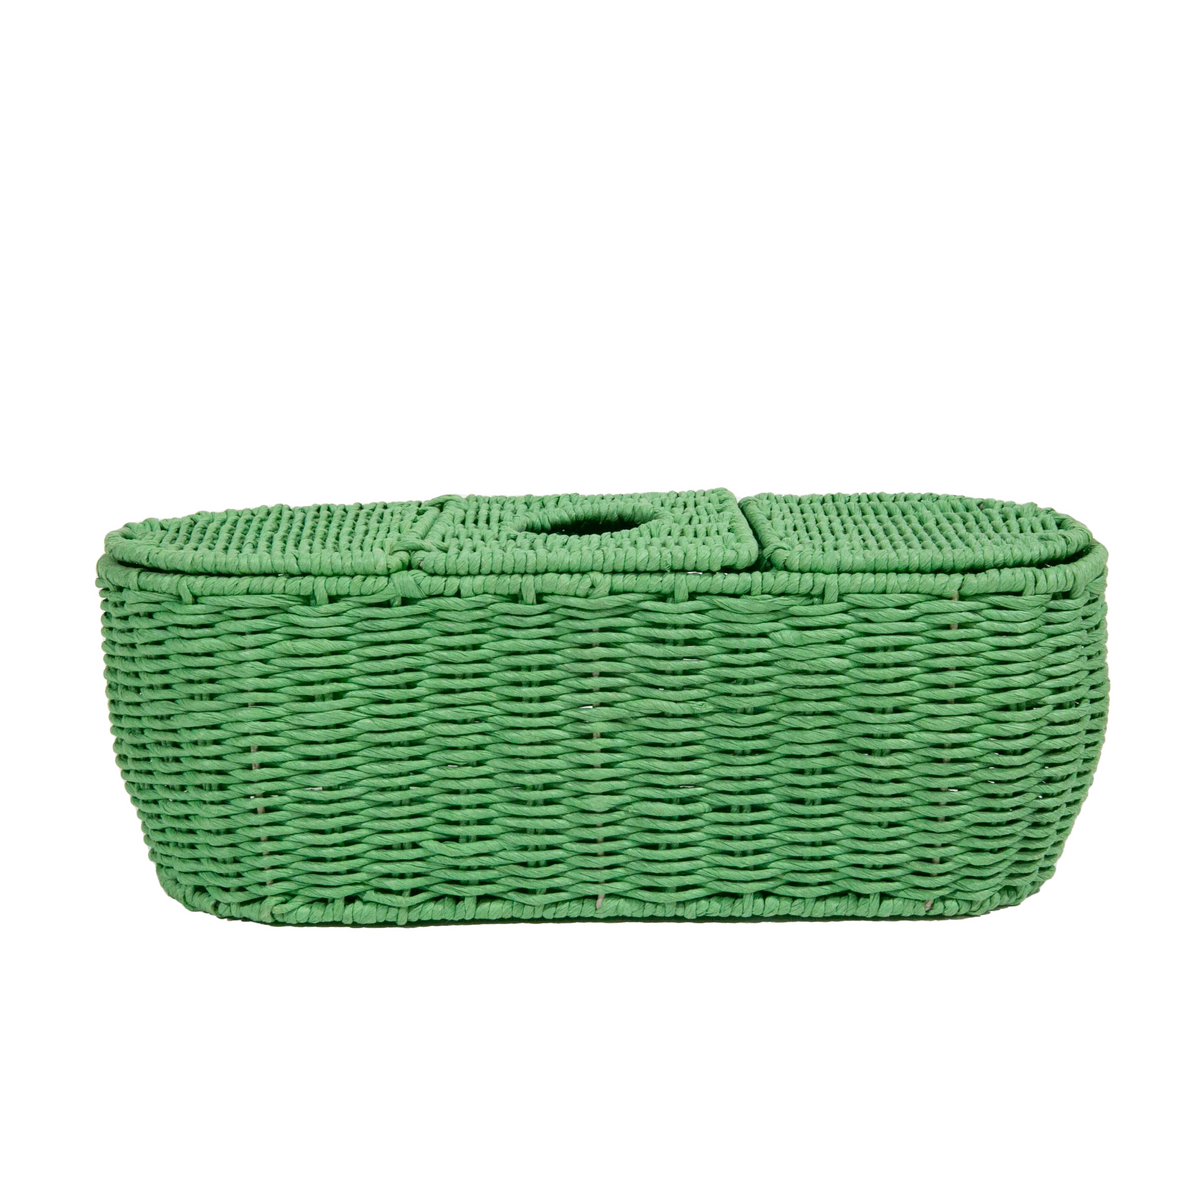 3 Part Tissue Basket in Twisted Rope